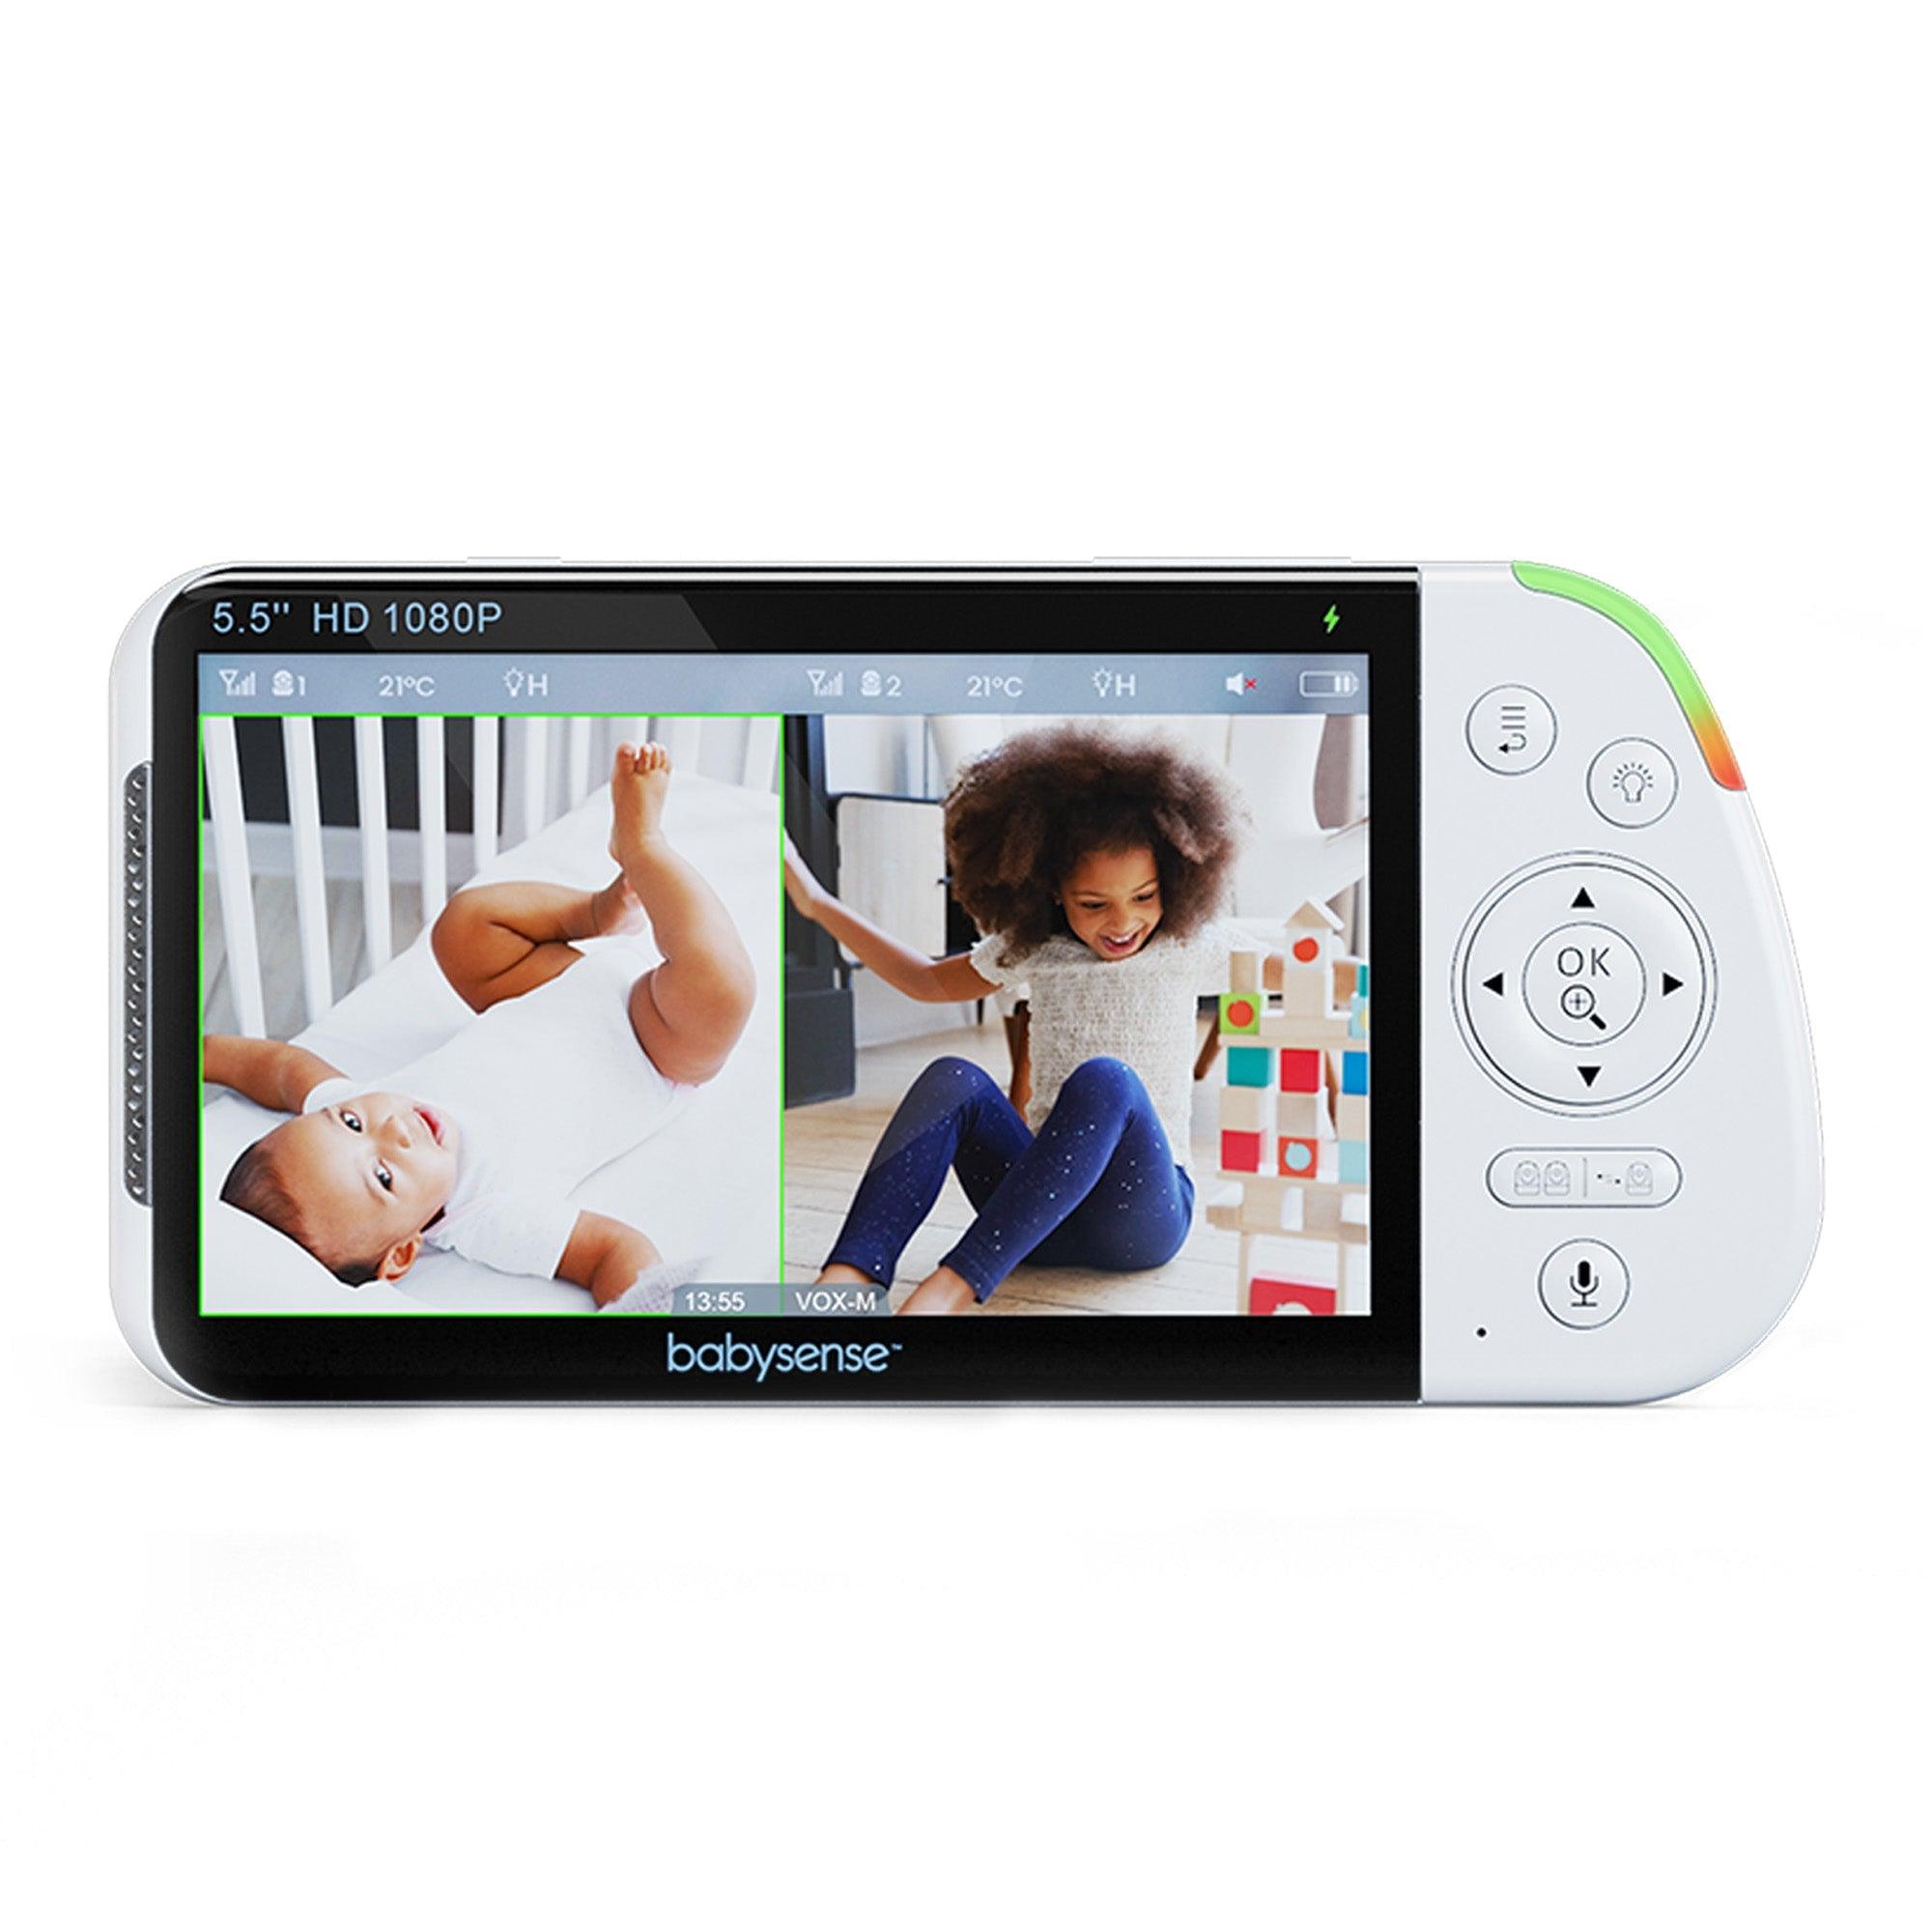 Parent Unit for 5.5" Split-Screen Video Baby Monitor MaxView - Babysense